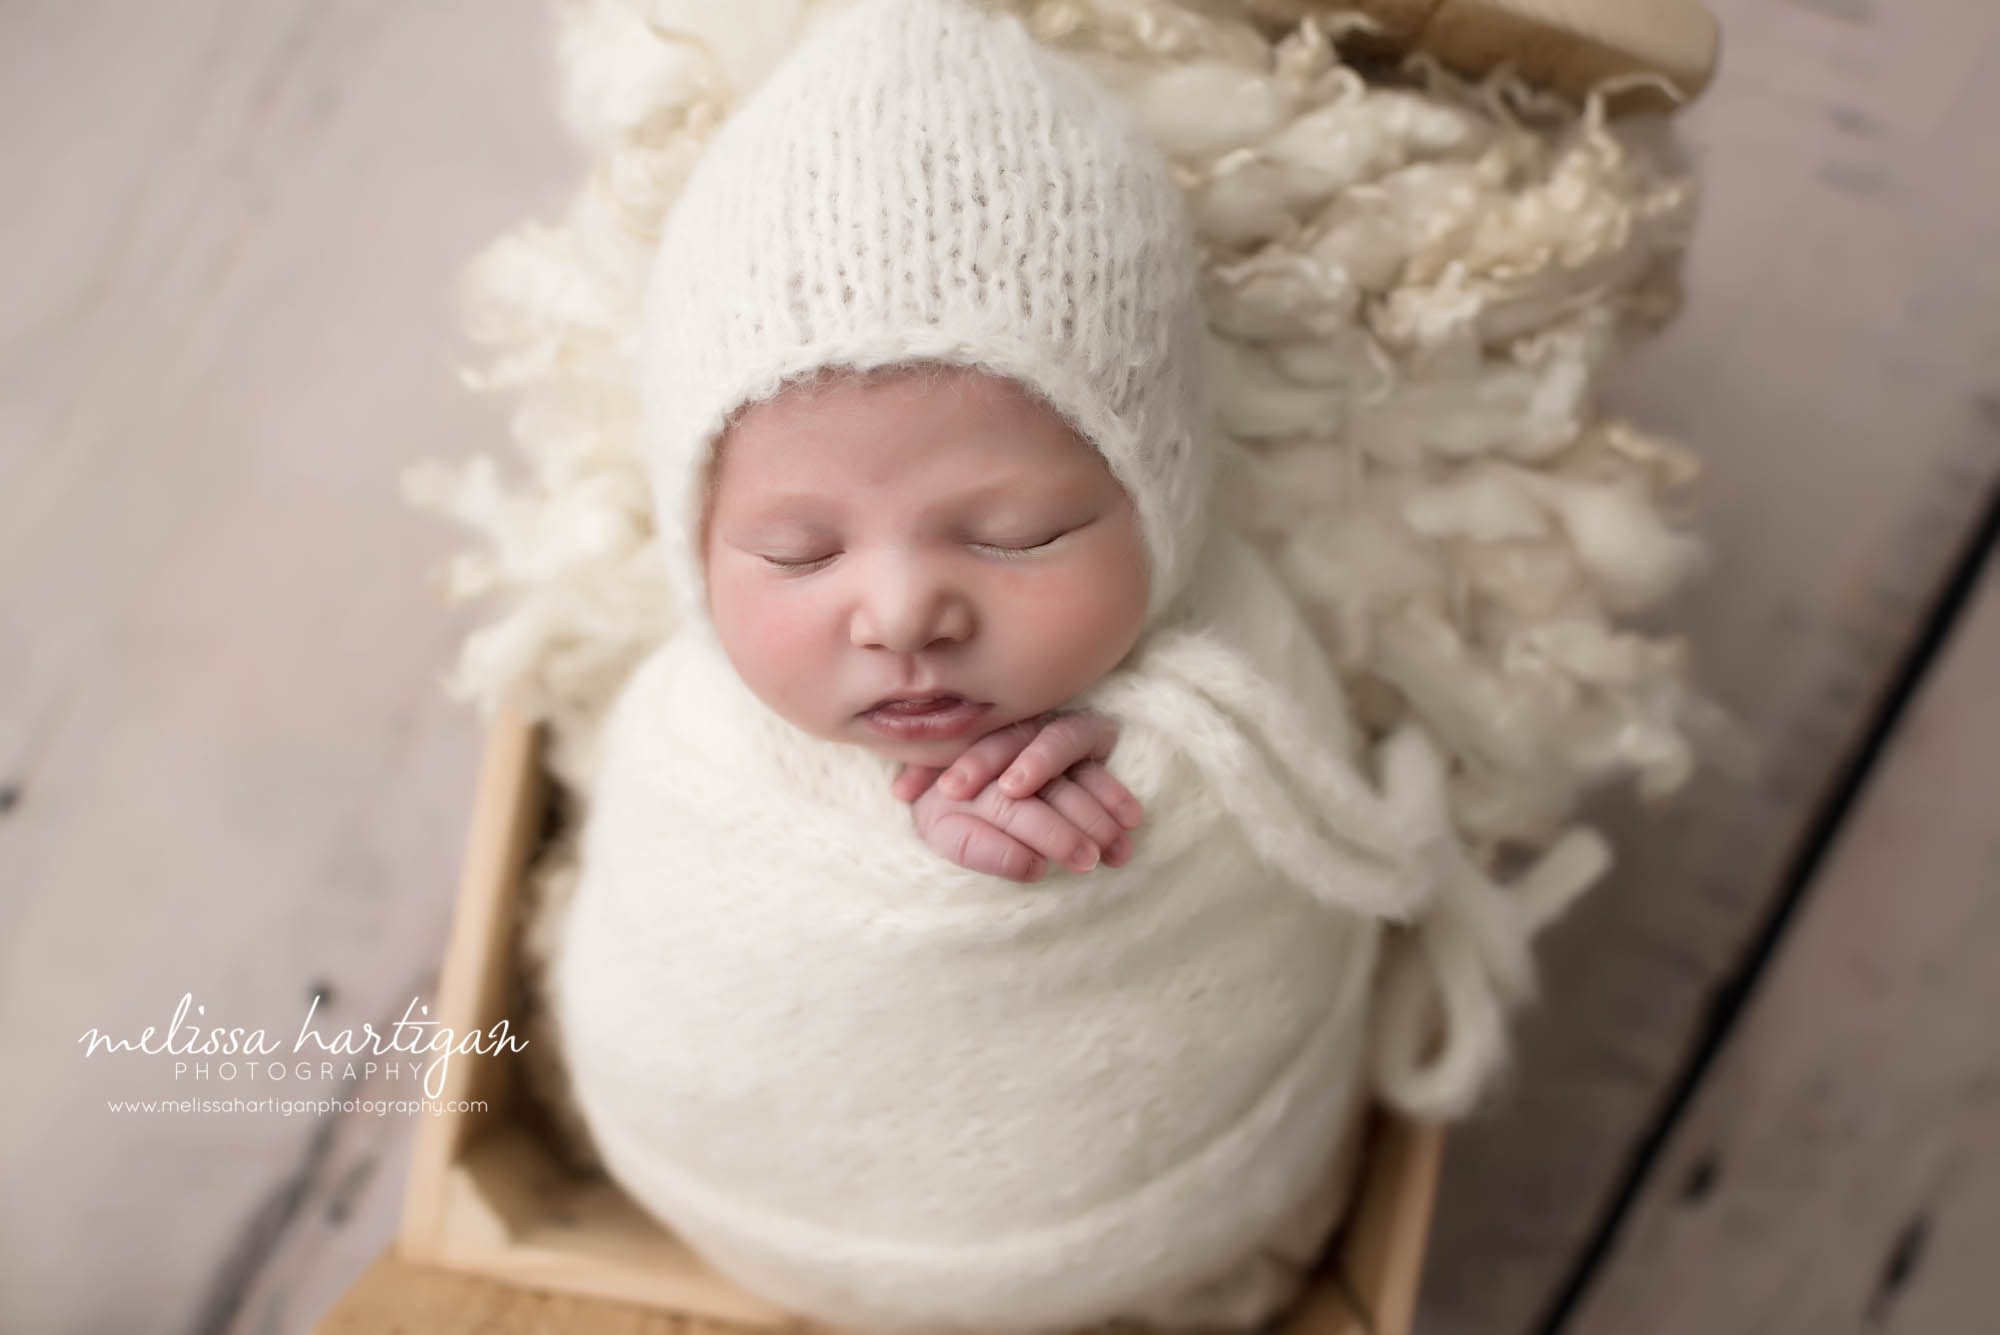 Melissa Hartigan Photography CT Newborn Photographer Ashford baby girl sleeping wrapped in cream with matching hat in wooden bed hands sticking out